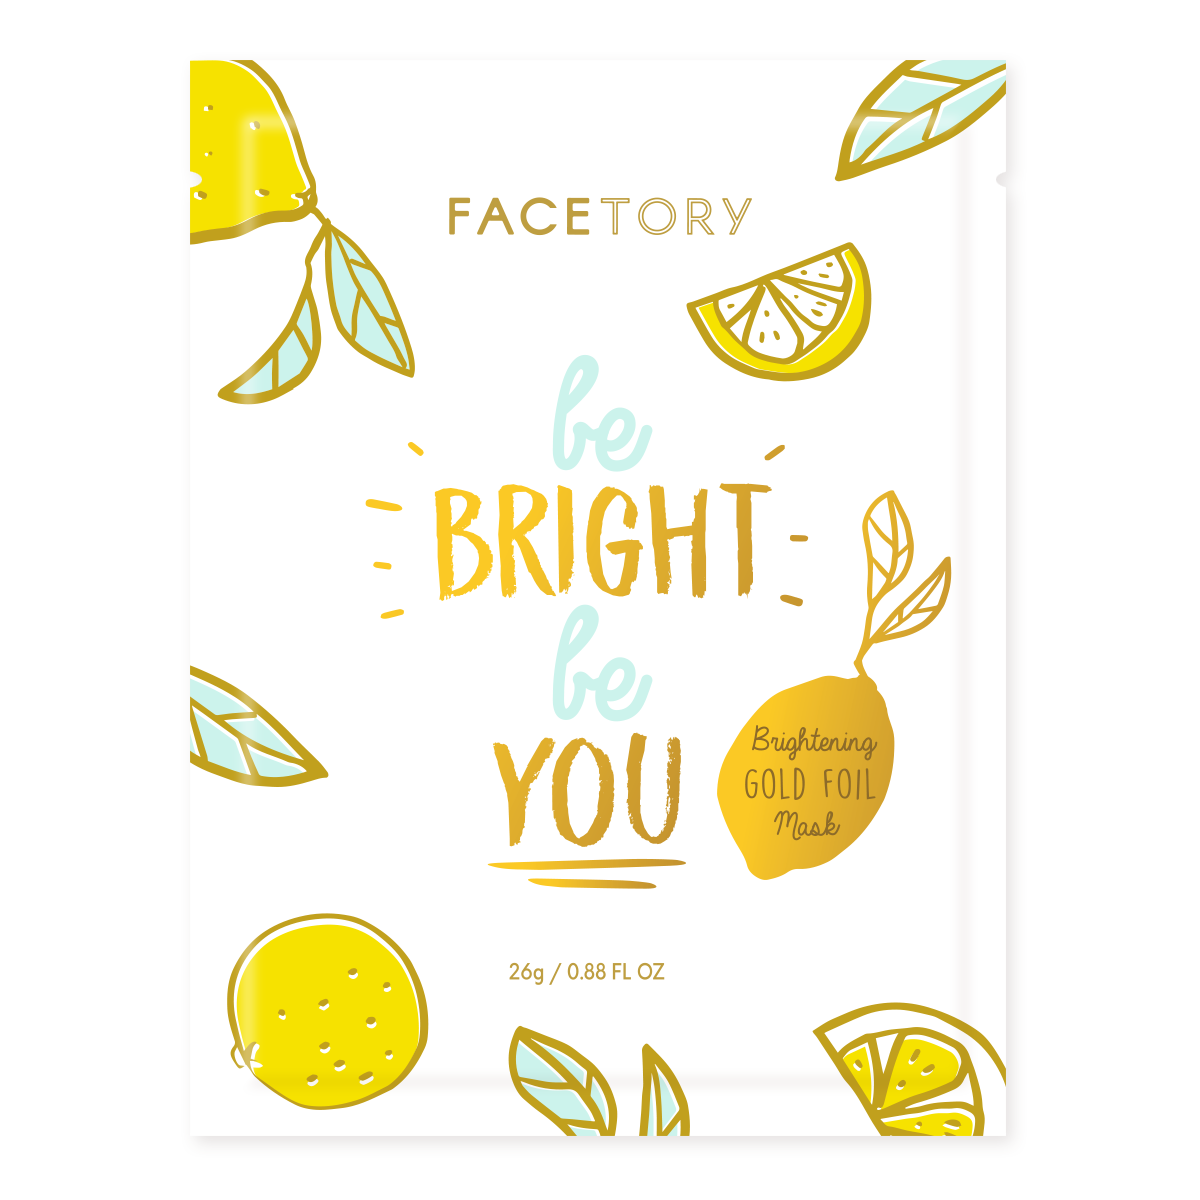 FaceTory - Be Bright Be You Brightening Foil Mask